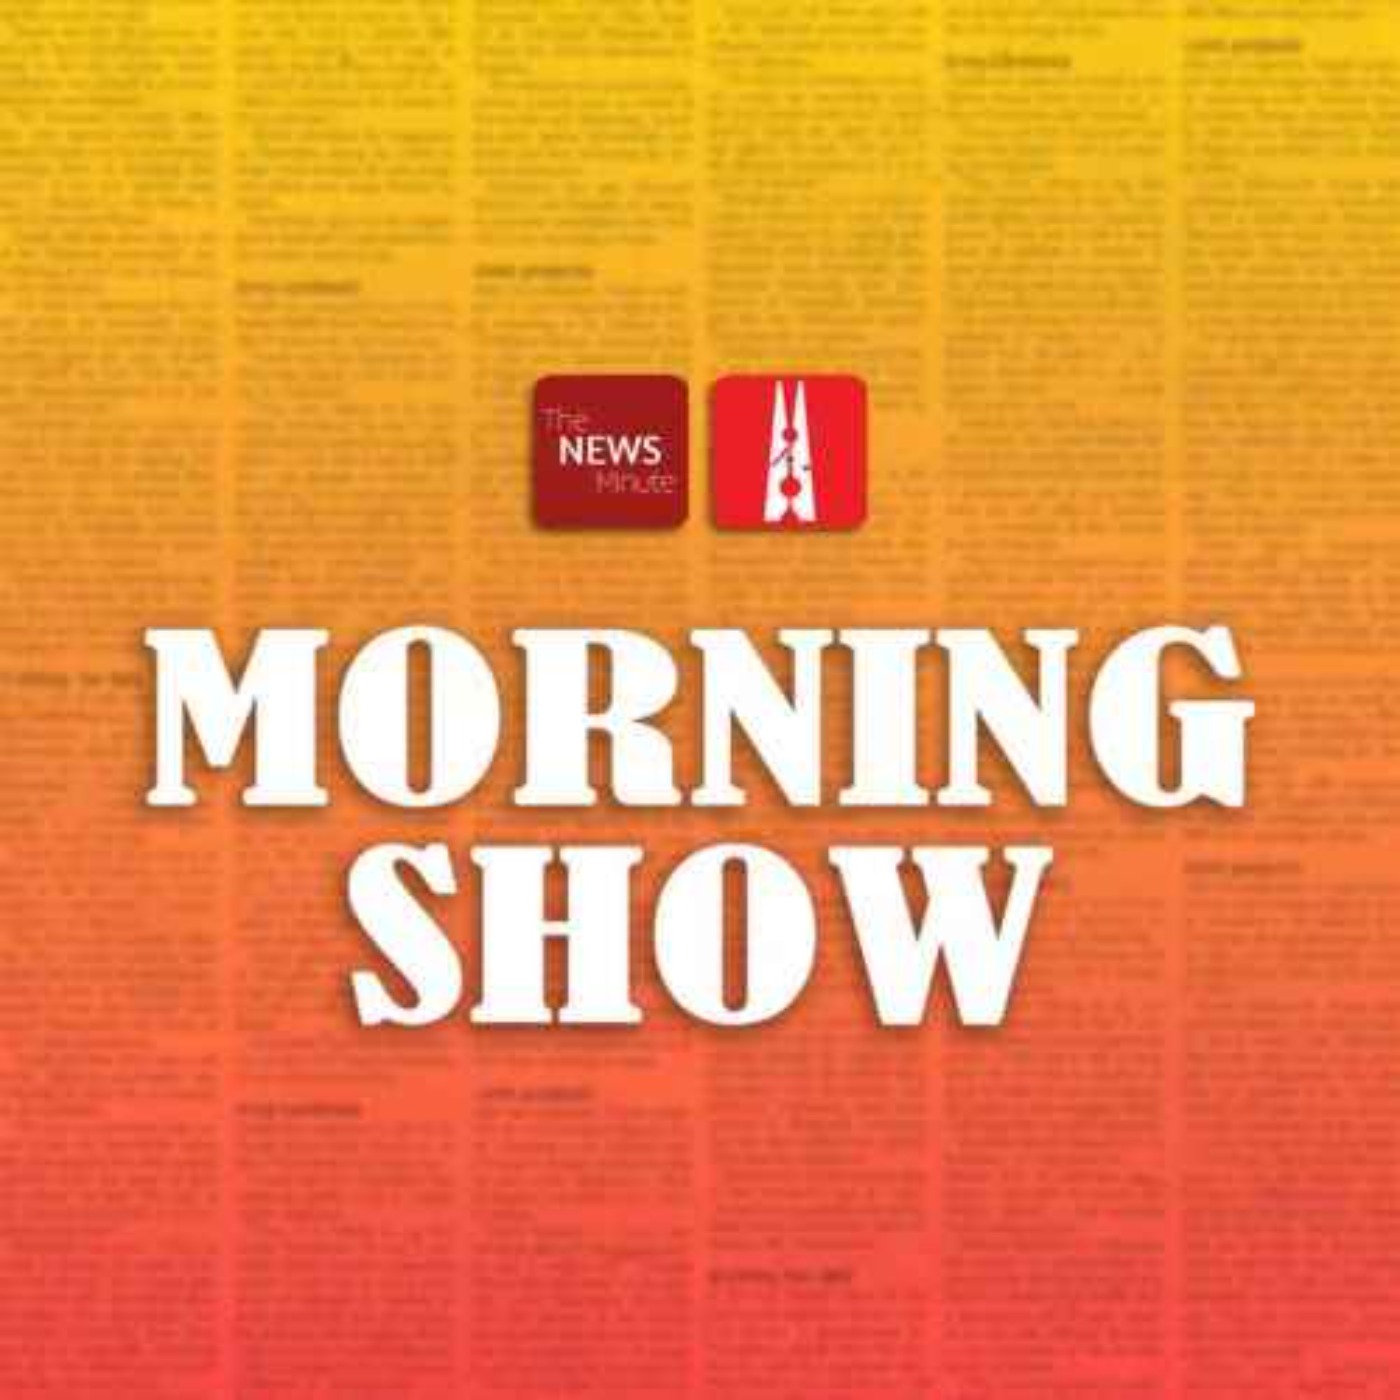 Morning Show: Who is BJP’s real star campaigner in Madhya Pradesh?